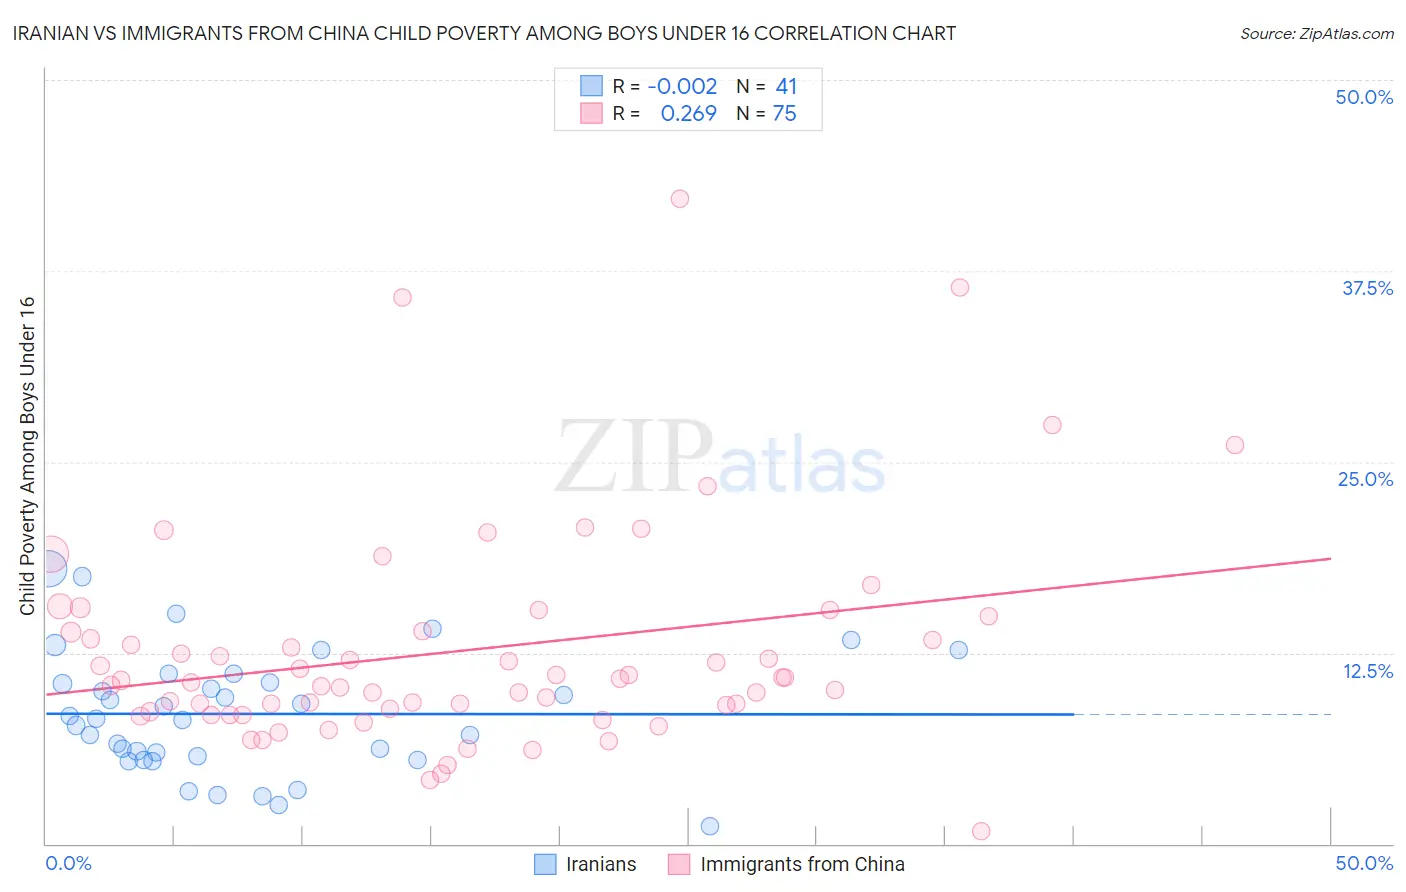 Iranian vs Immigrants from China Child Poverty Among Boys Under 16